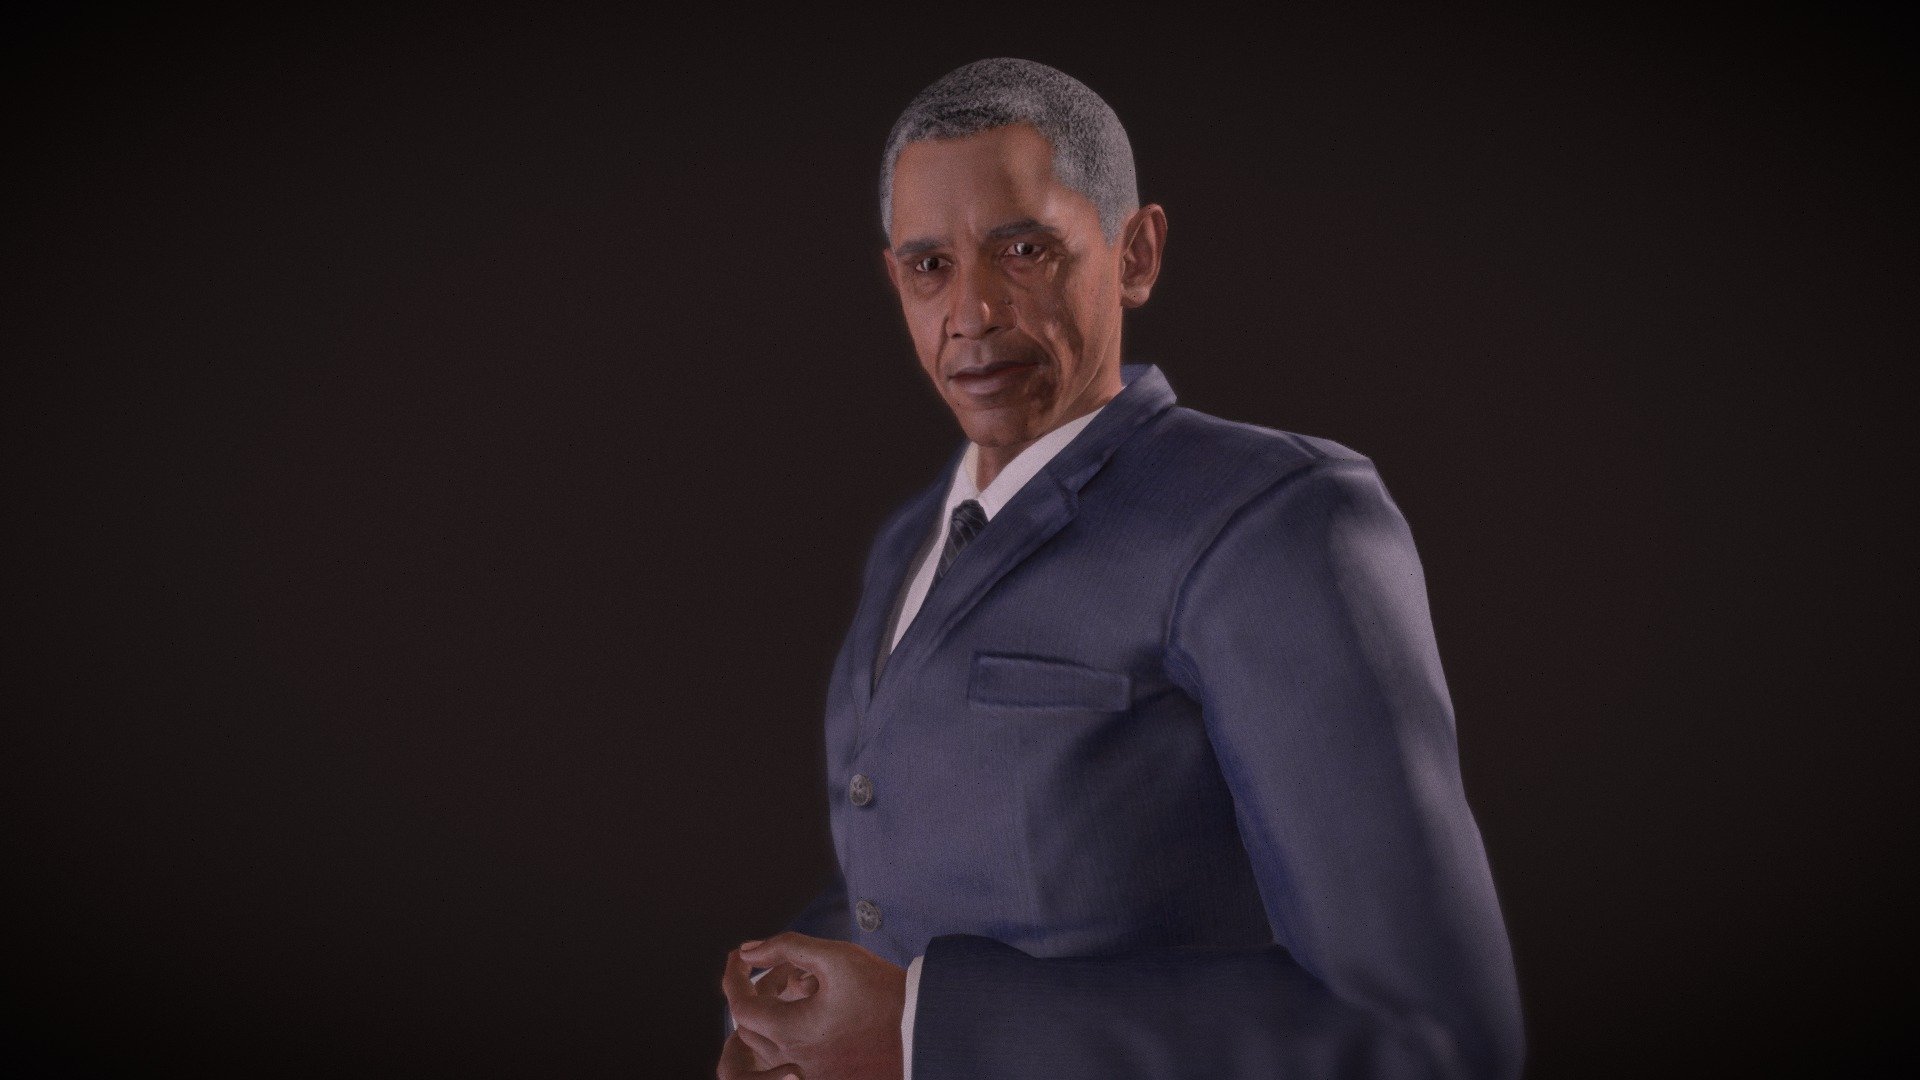 I had fun to sculpt Barack Obama !
Here is my video showing my work on Obama : https://youtu.be/WJQBOhctXb4

Hope you enjoy,
Cheers,
PhiBix - This is not BARACK OBAMA (by PhiBix) - 3D model by PhiBix 3d model